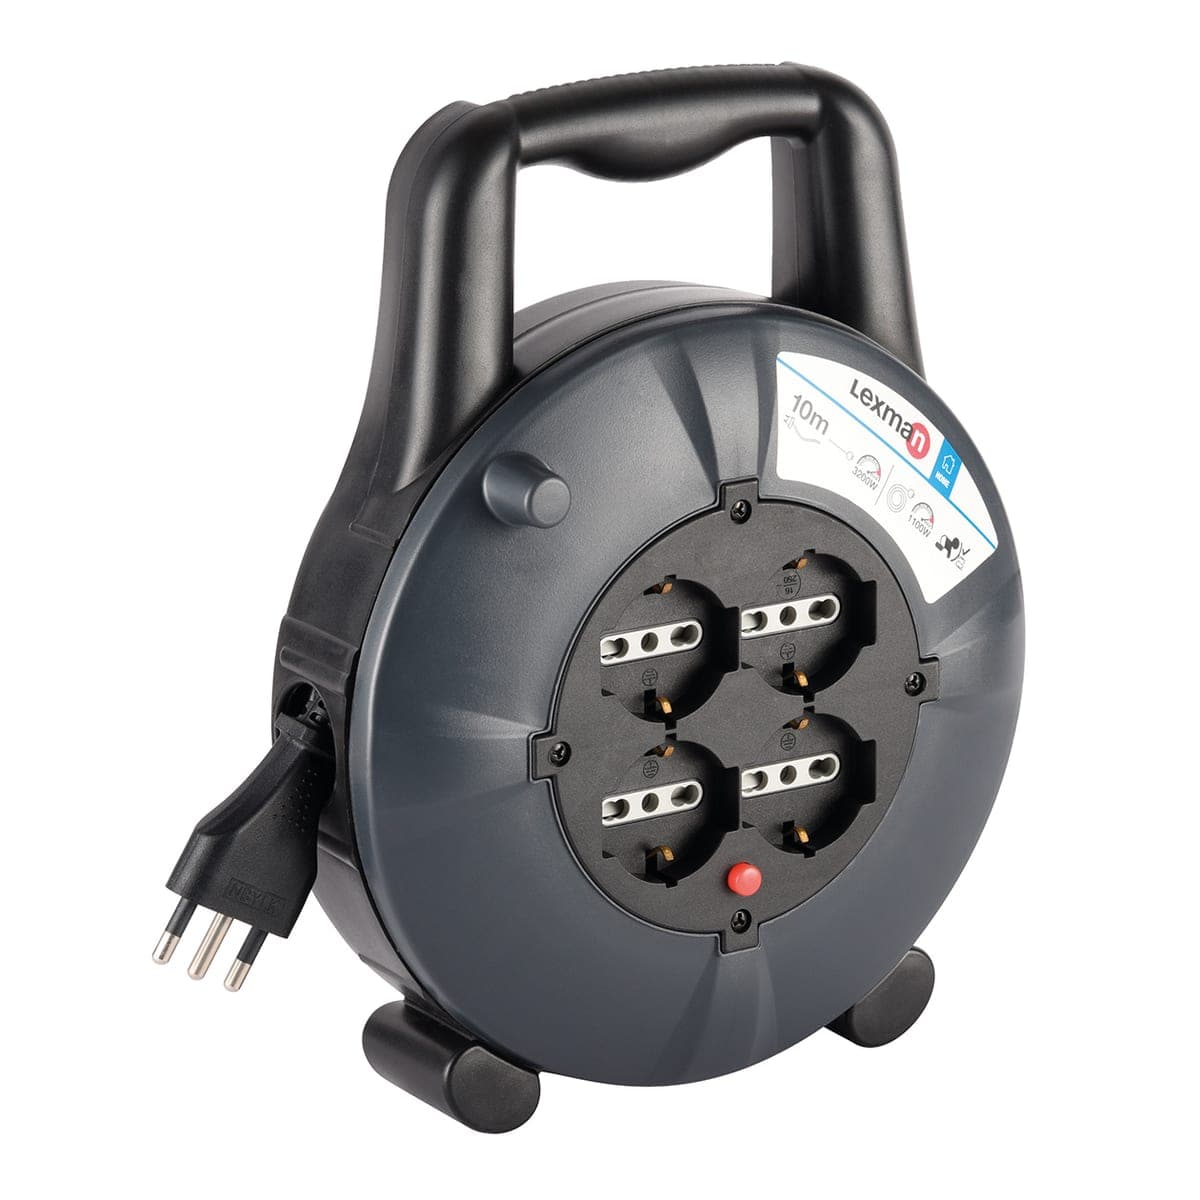 CABLE REEL 10MT PLUG 16A 4 UNIVERSAL SOCKETS WITH THERMAL CIRCUIT BREAKER - best price from Maltashopper.com BR420003054